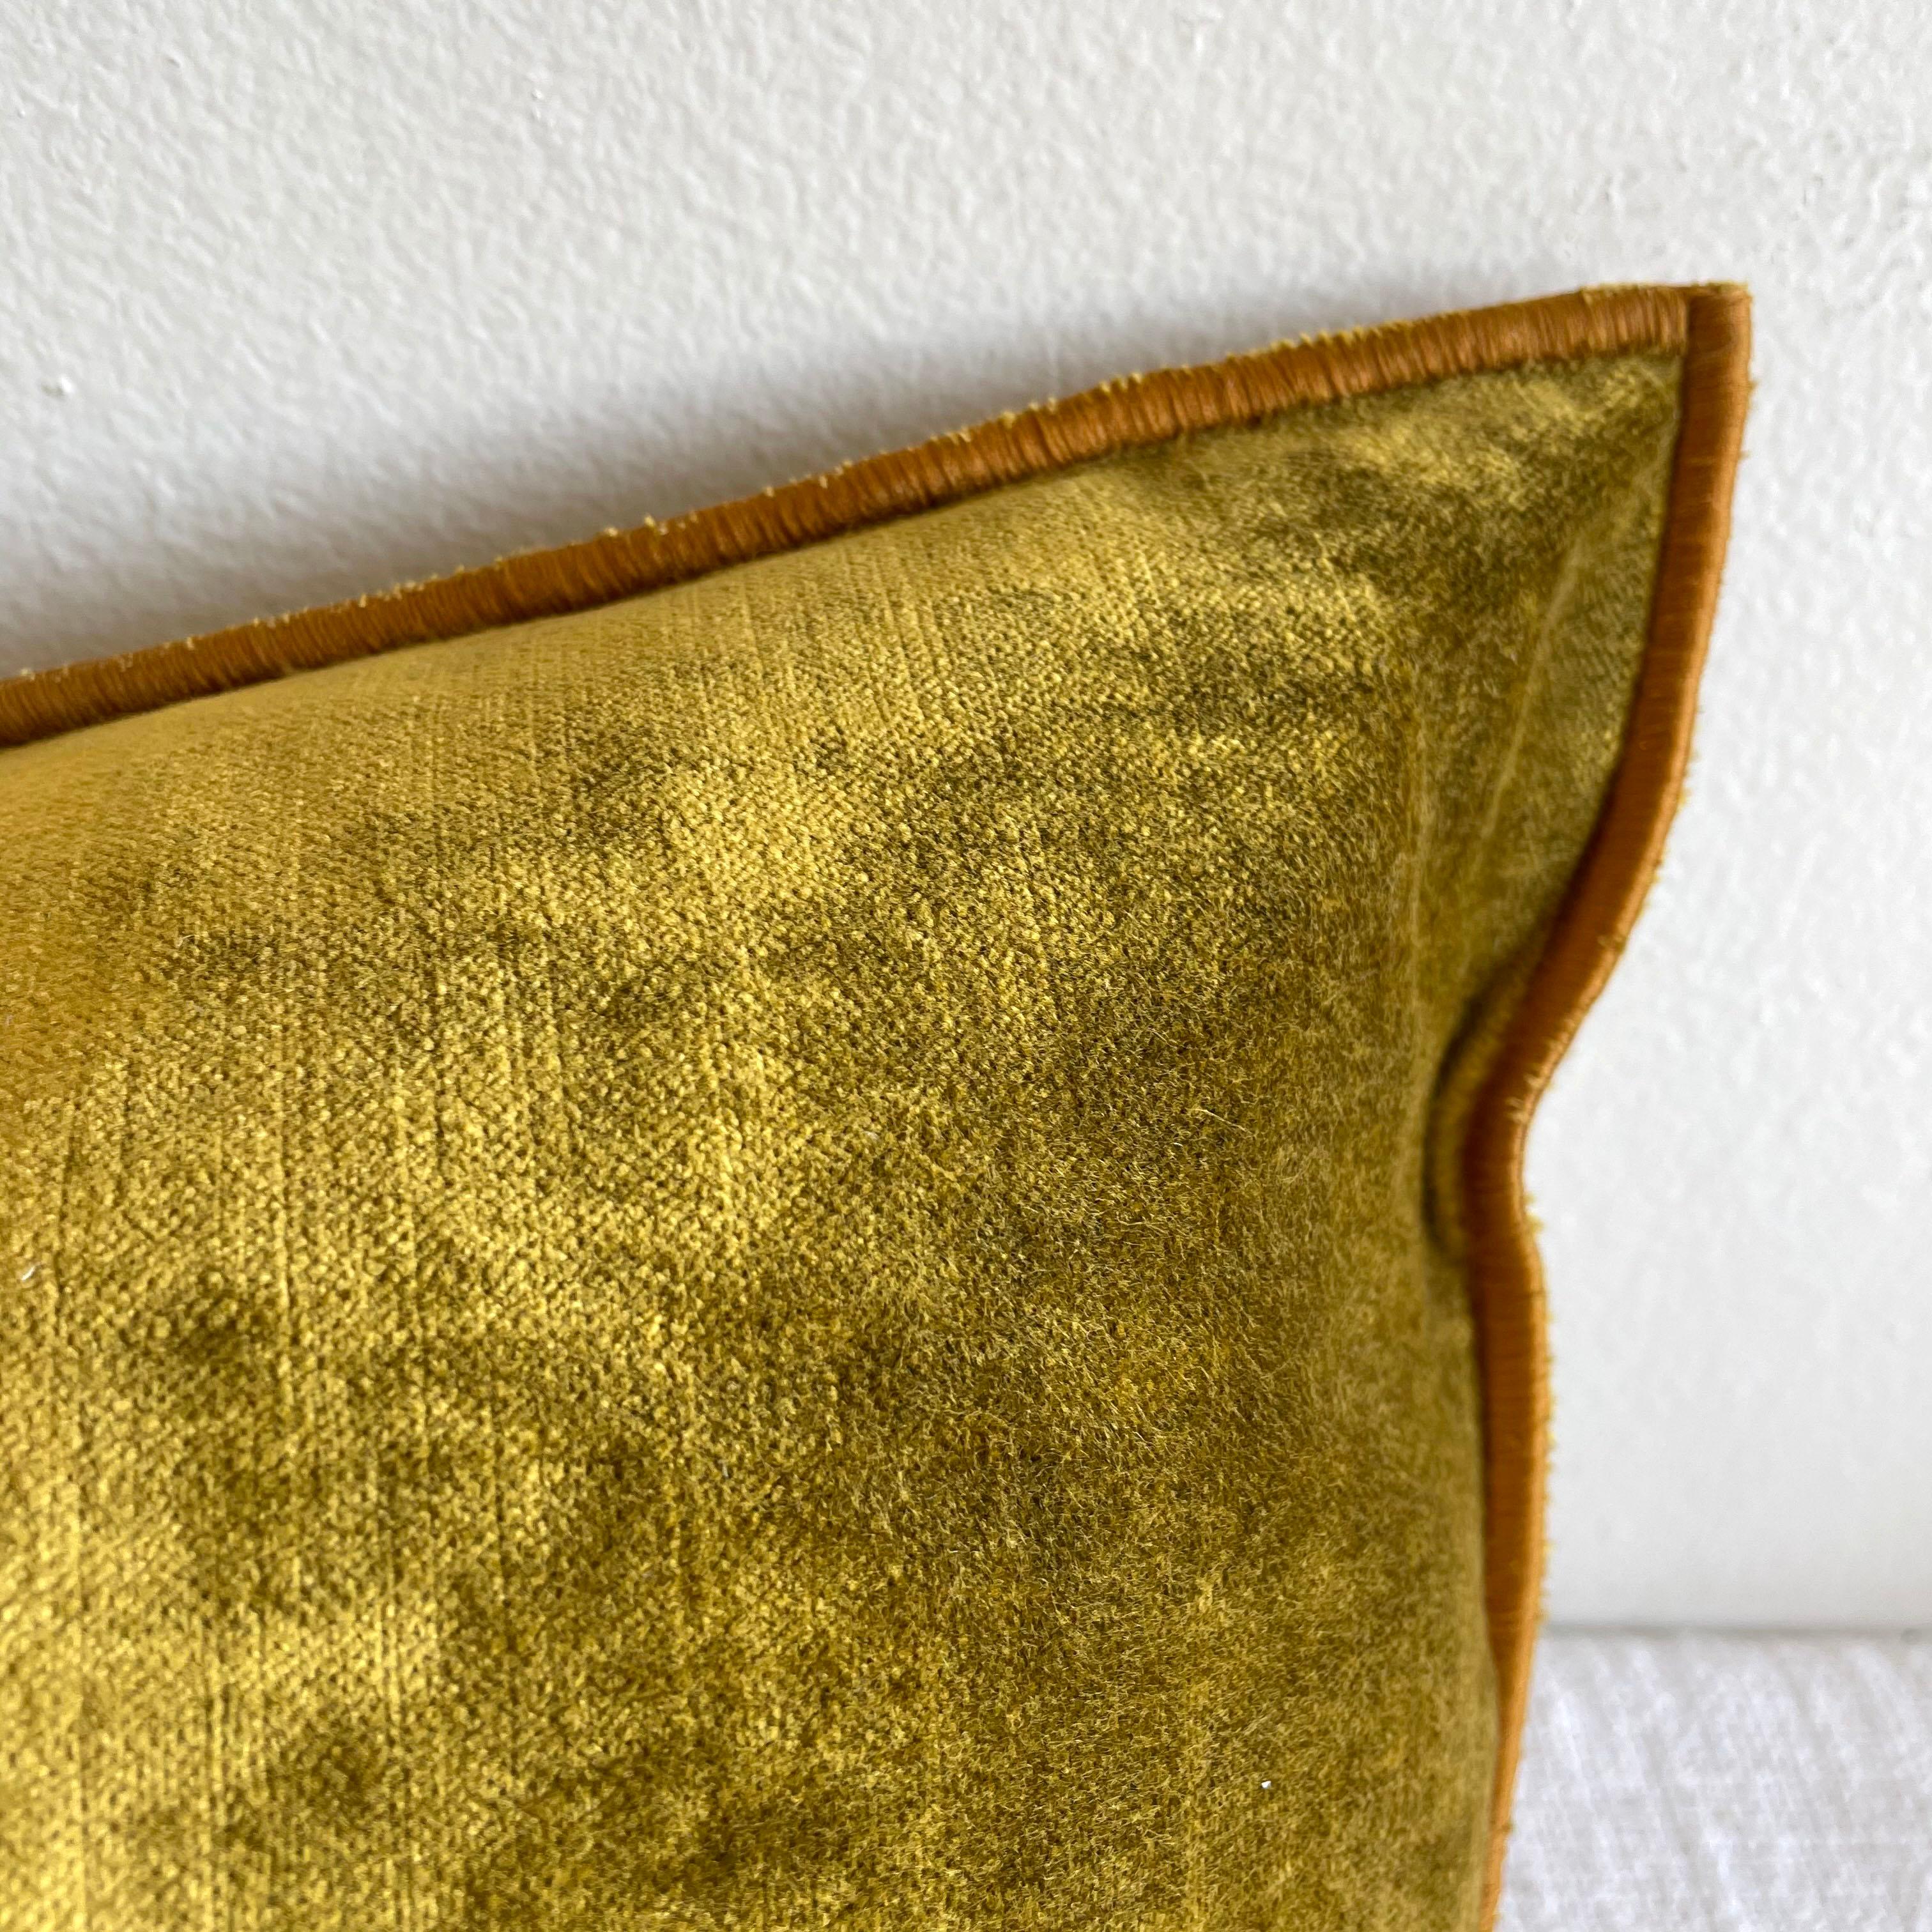 Beautiful rich mustard yellow vintage style velvet lumbar with binded edge. Metal zipper closure, and leather pull.

Custom made in Paris, France.

Size: 12? x 20?.